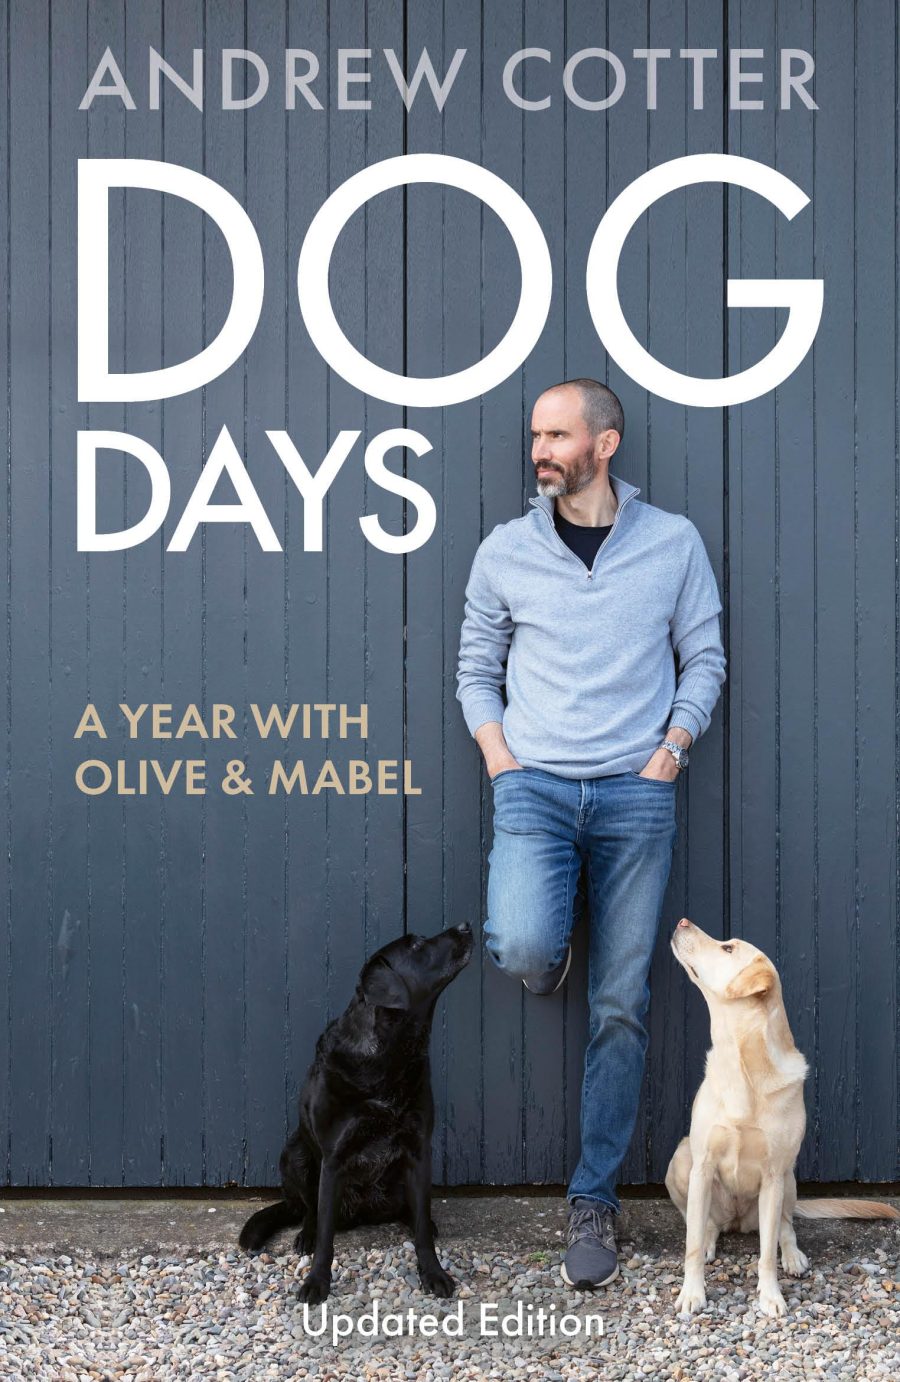 Andrew Cotter book cover 'Dog Days'. Andrew is standing against a blue wooden wall, one foot up. His labrador dogs are on either side looking towards him.